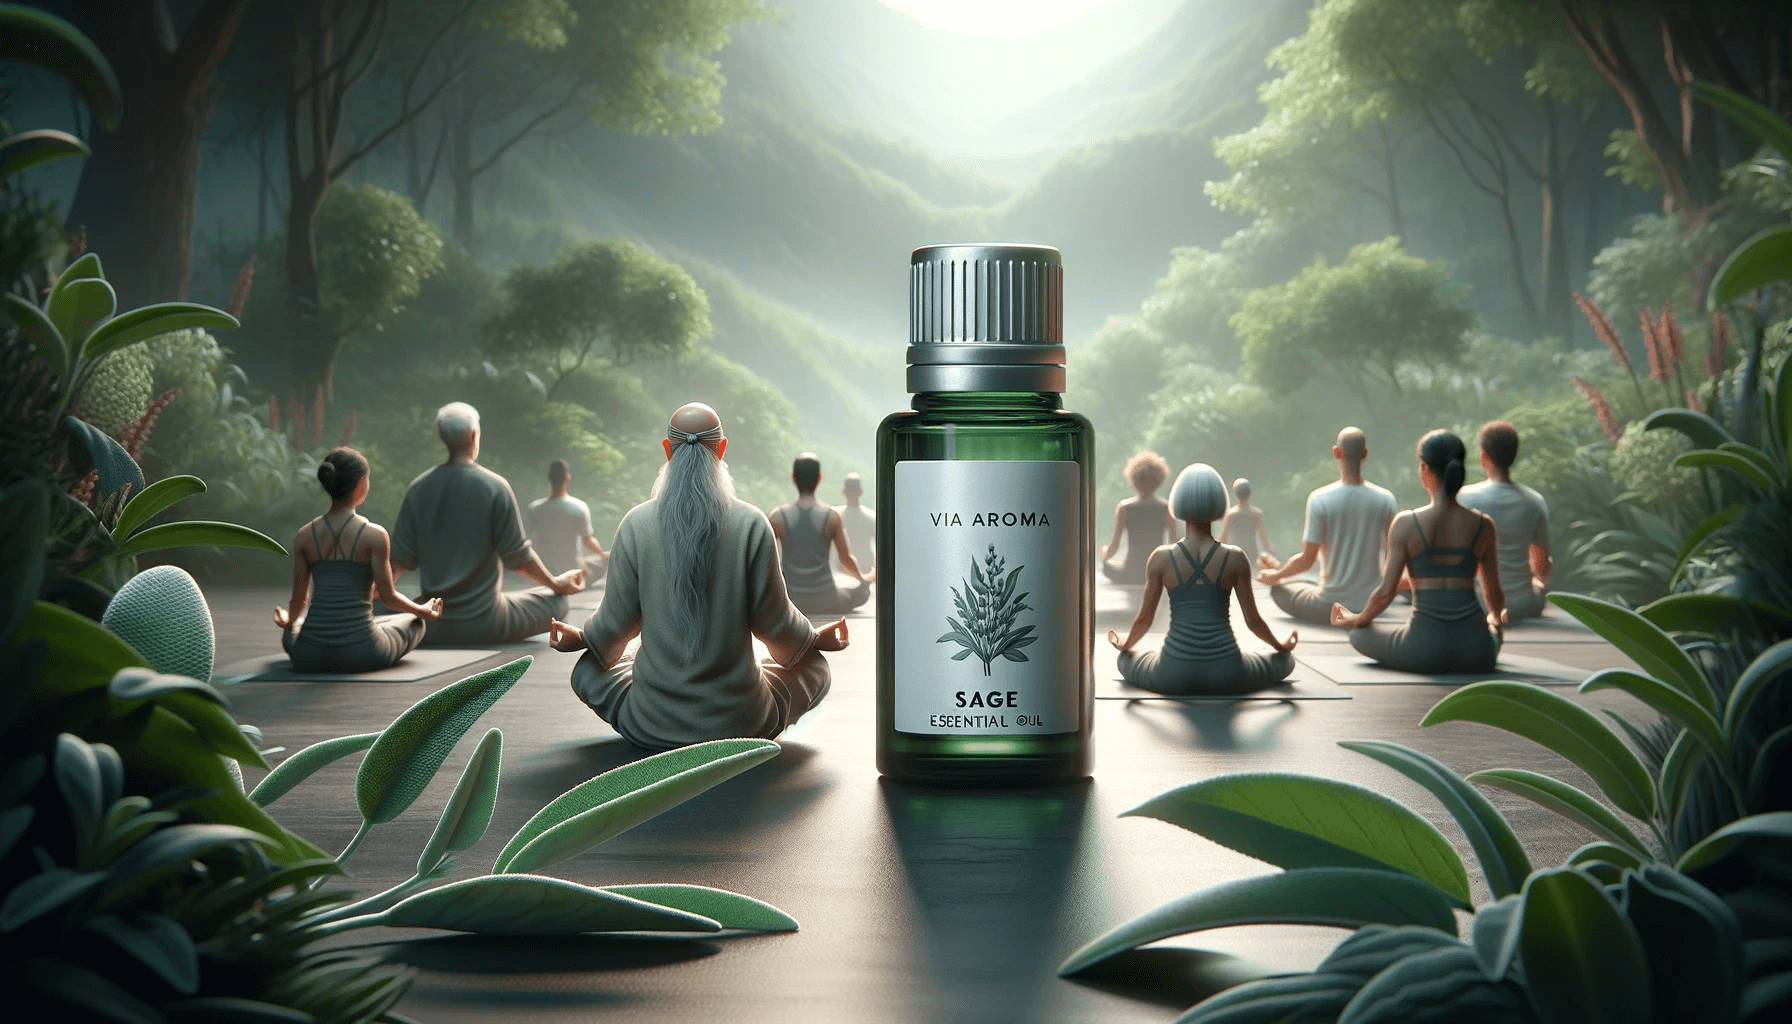 DALL·E 2024 01 23 14.44.32 Refine the composition by enhancing the clarity and detail of both the Via Aroma sage essential oil bottle and the small group of individuals practici